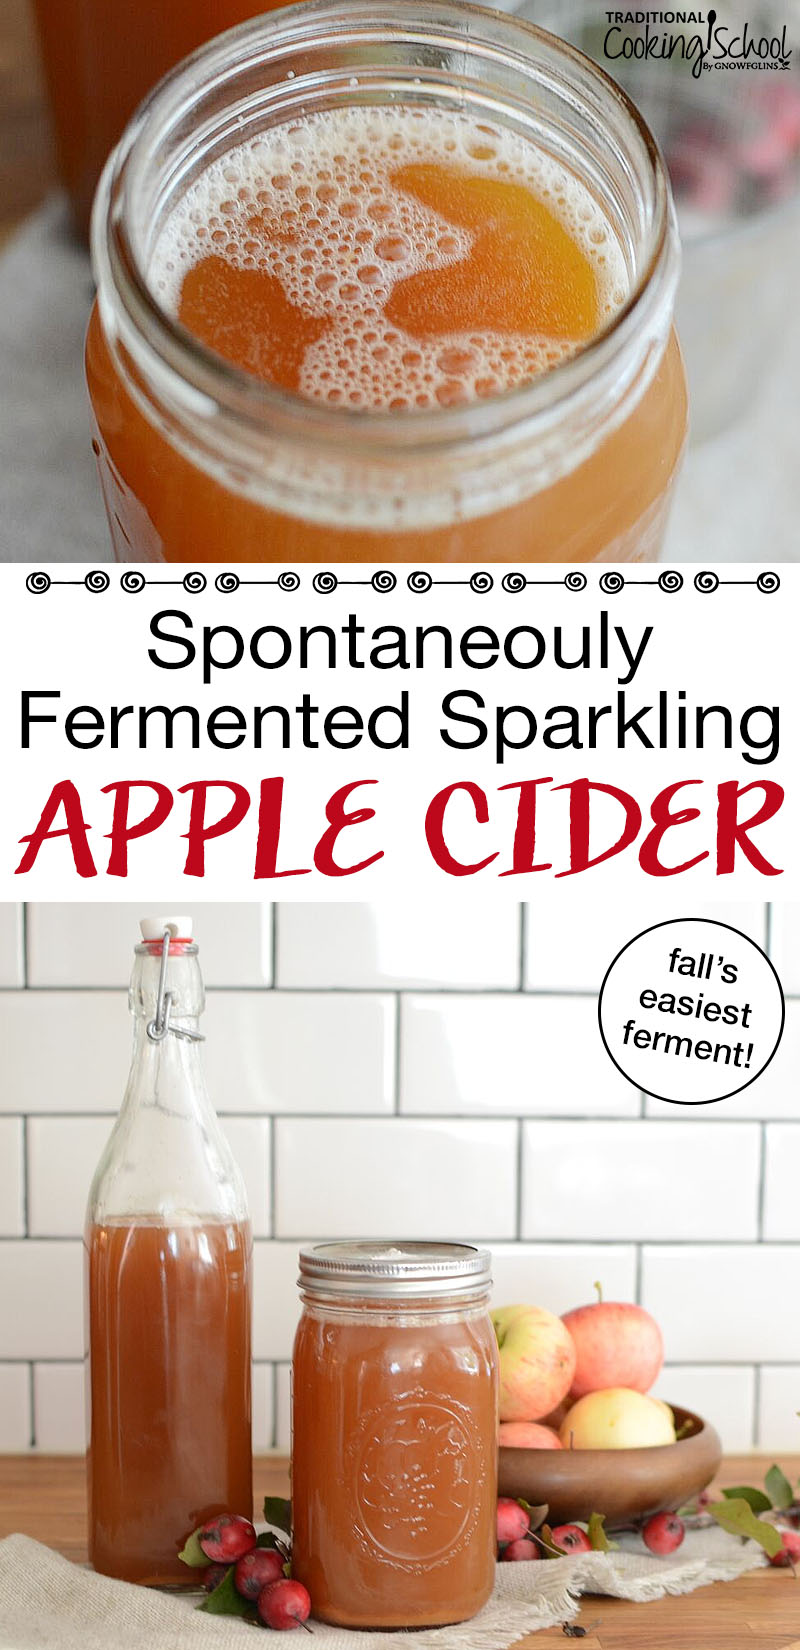 Spontaneously Fermented Sparkling Apple Cider {fall's easiest ferment!} | Wherever you live, I want you to get your hands on as many organic apples as you can... the uglier the better... so you can make spontaneously fermented sparkling apple cider! Fall's easiest ferment requires only fresh-pressed cider and a glass container! It's so easy! | TraditionalCookingSchool.com